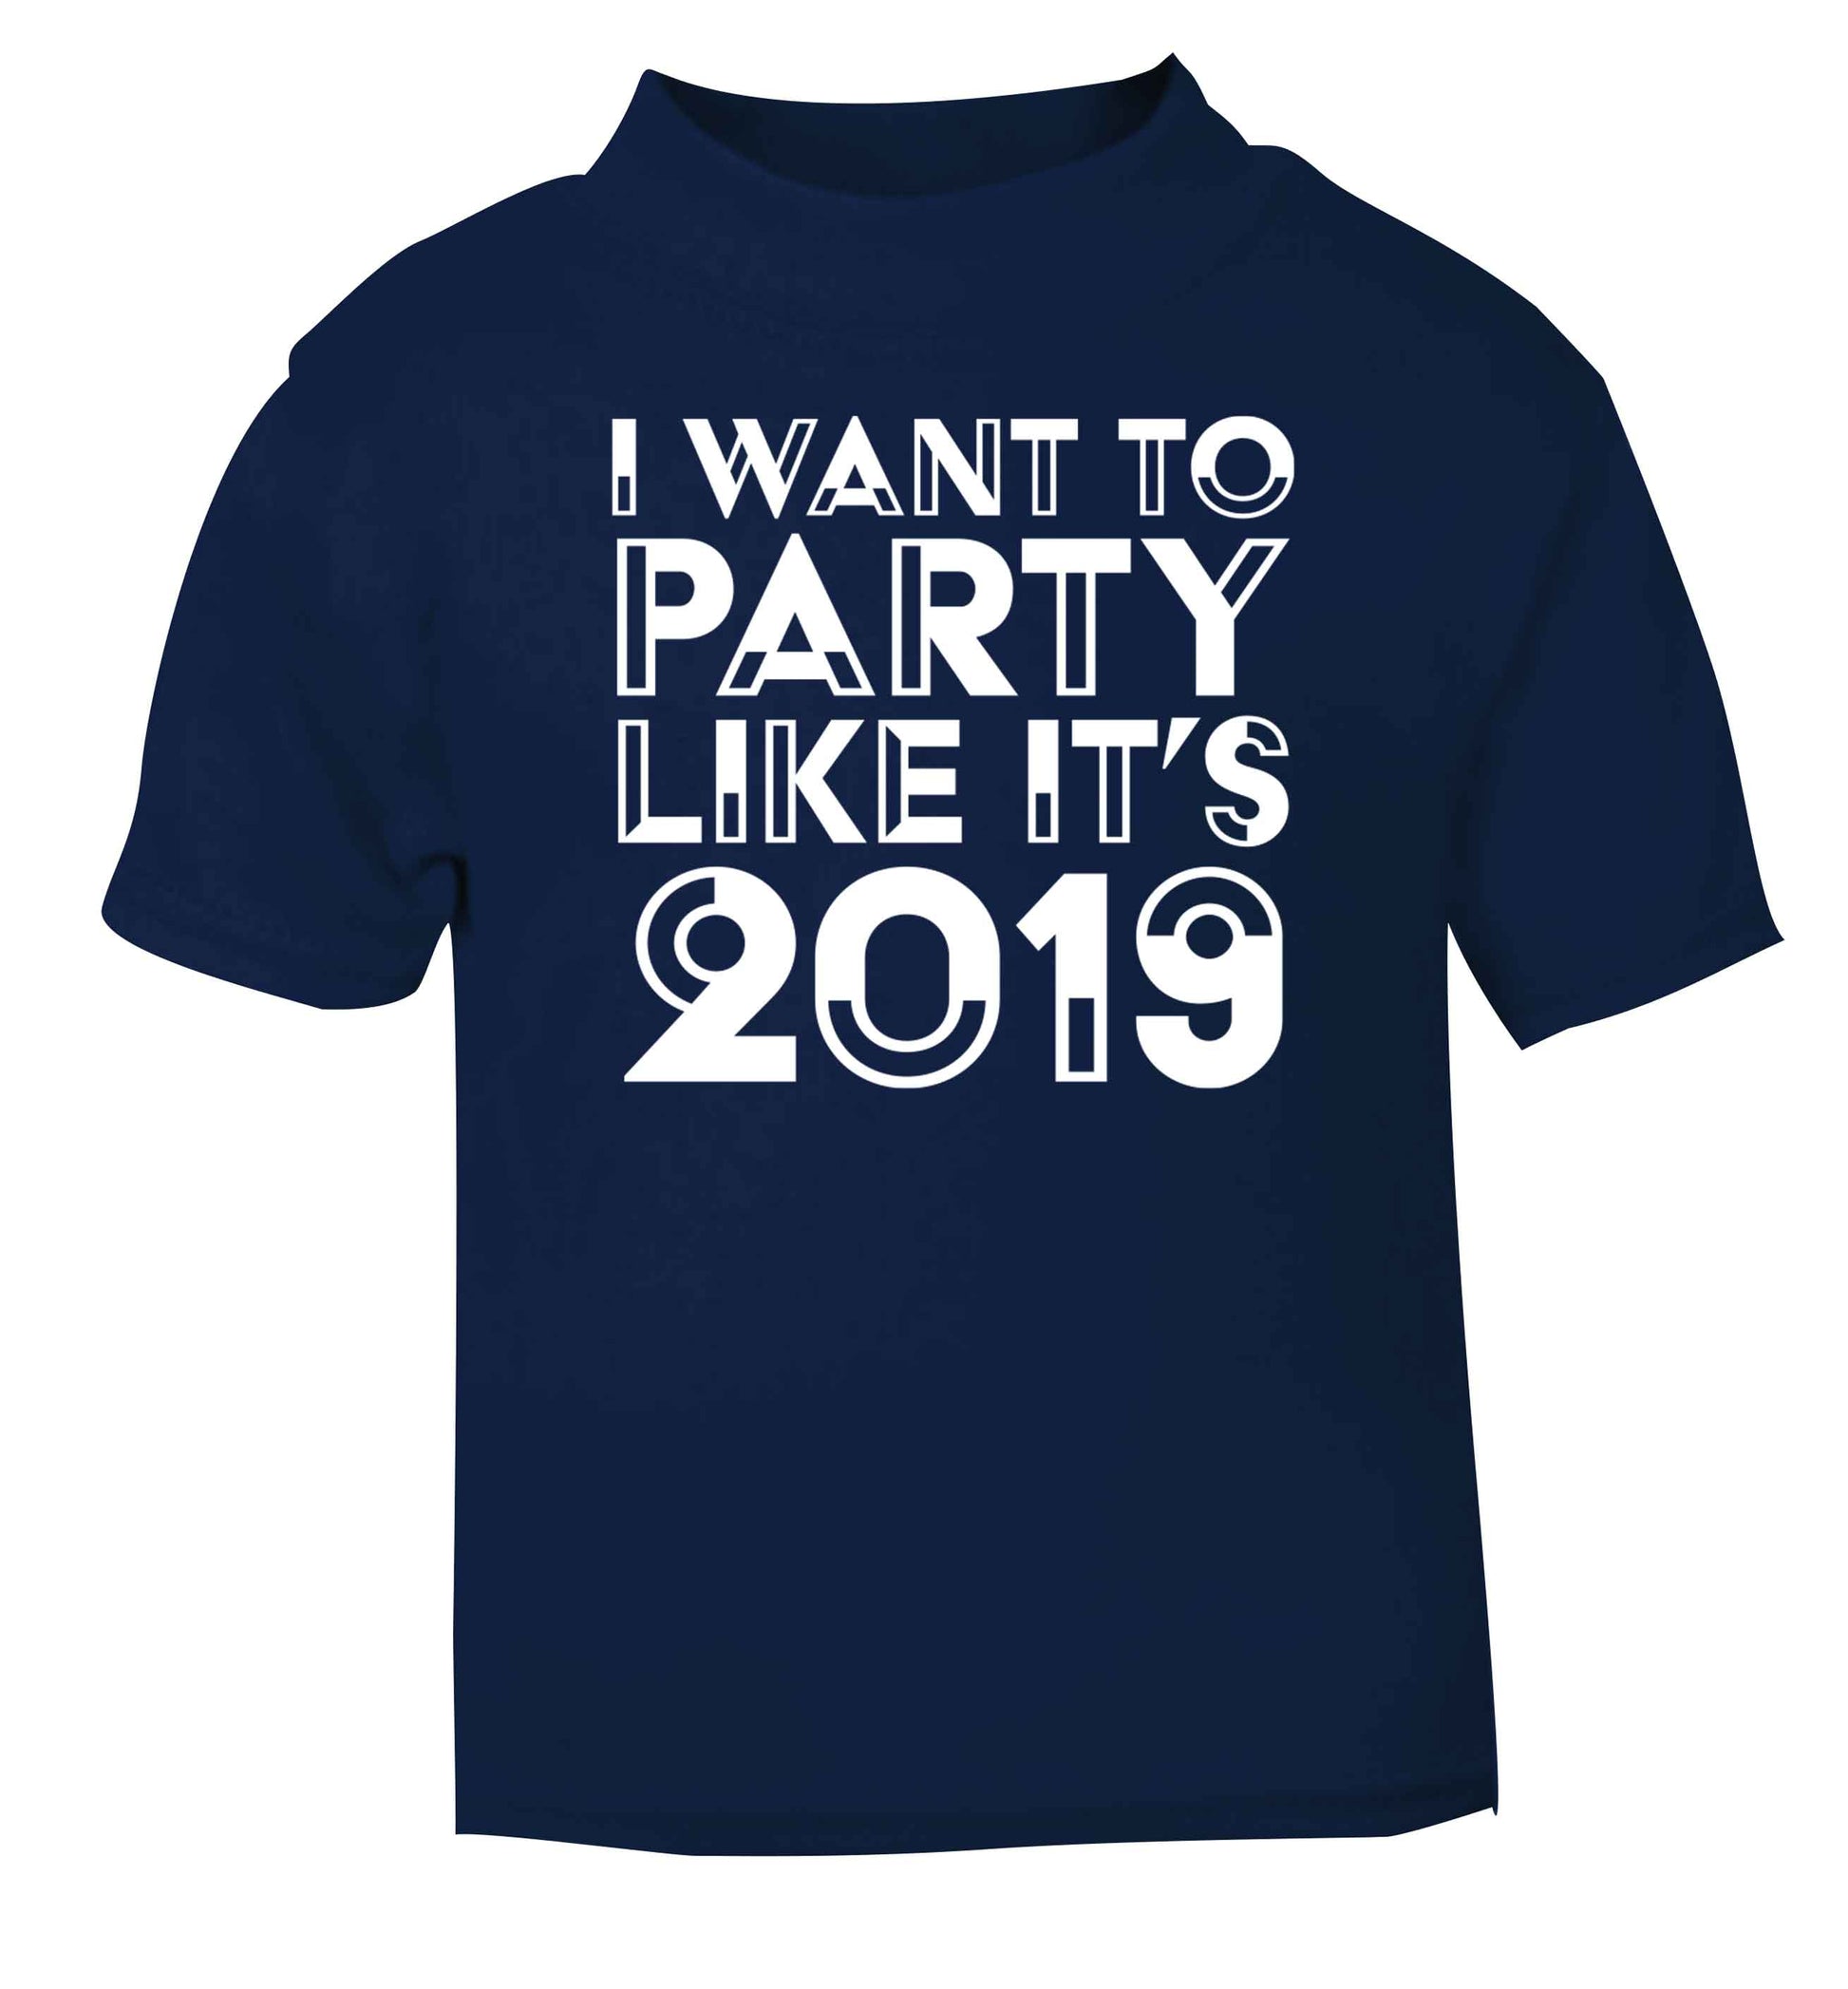 I want to party like it's 2019 navy baby toddler Tshirt 2 Years